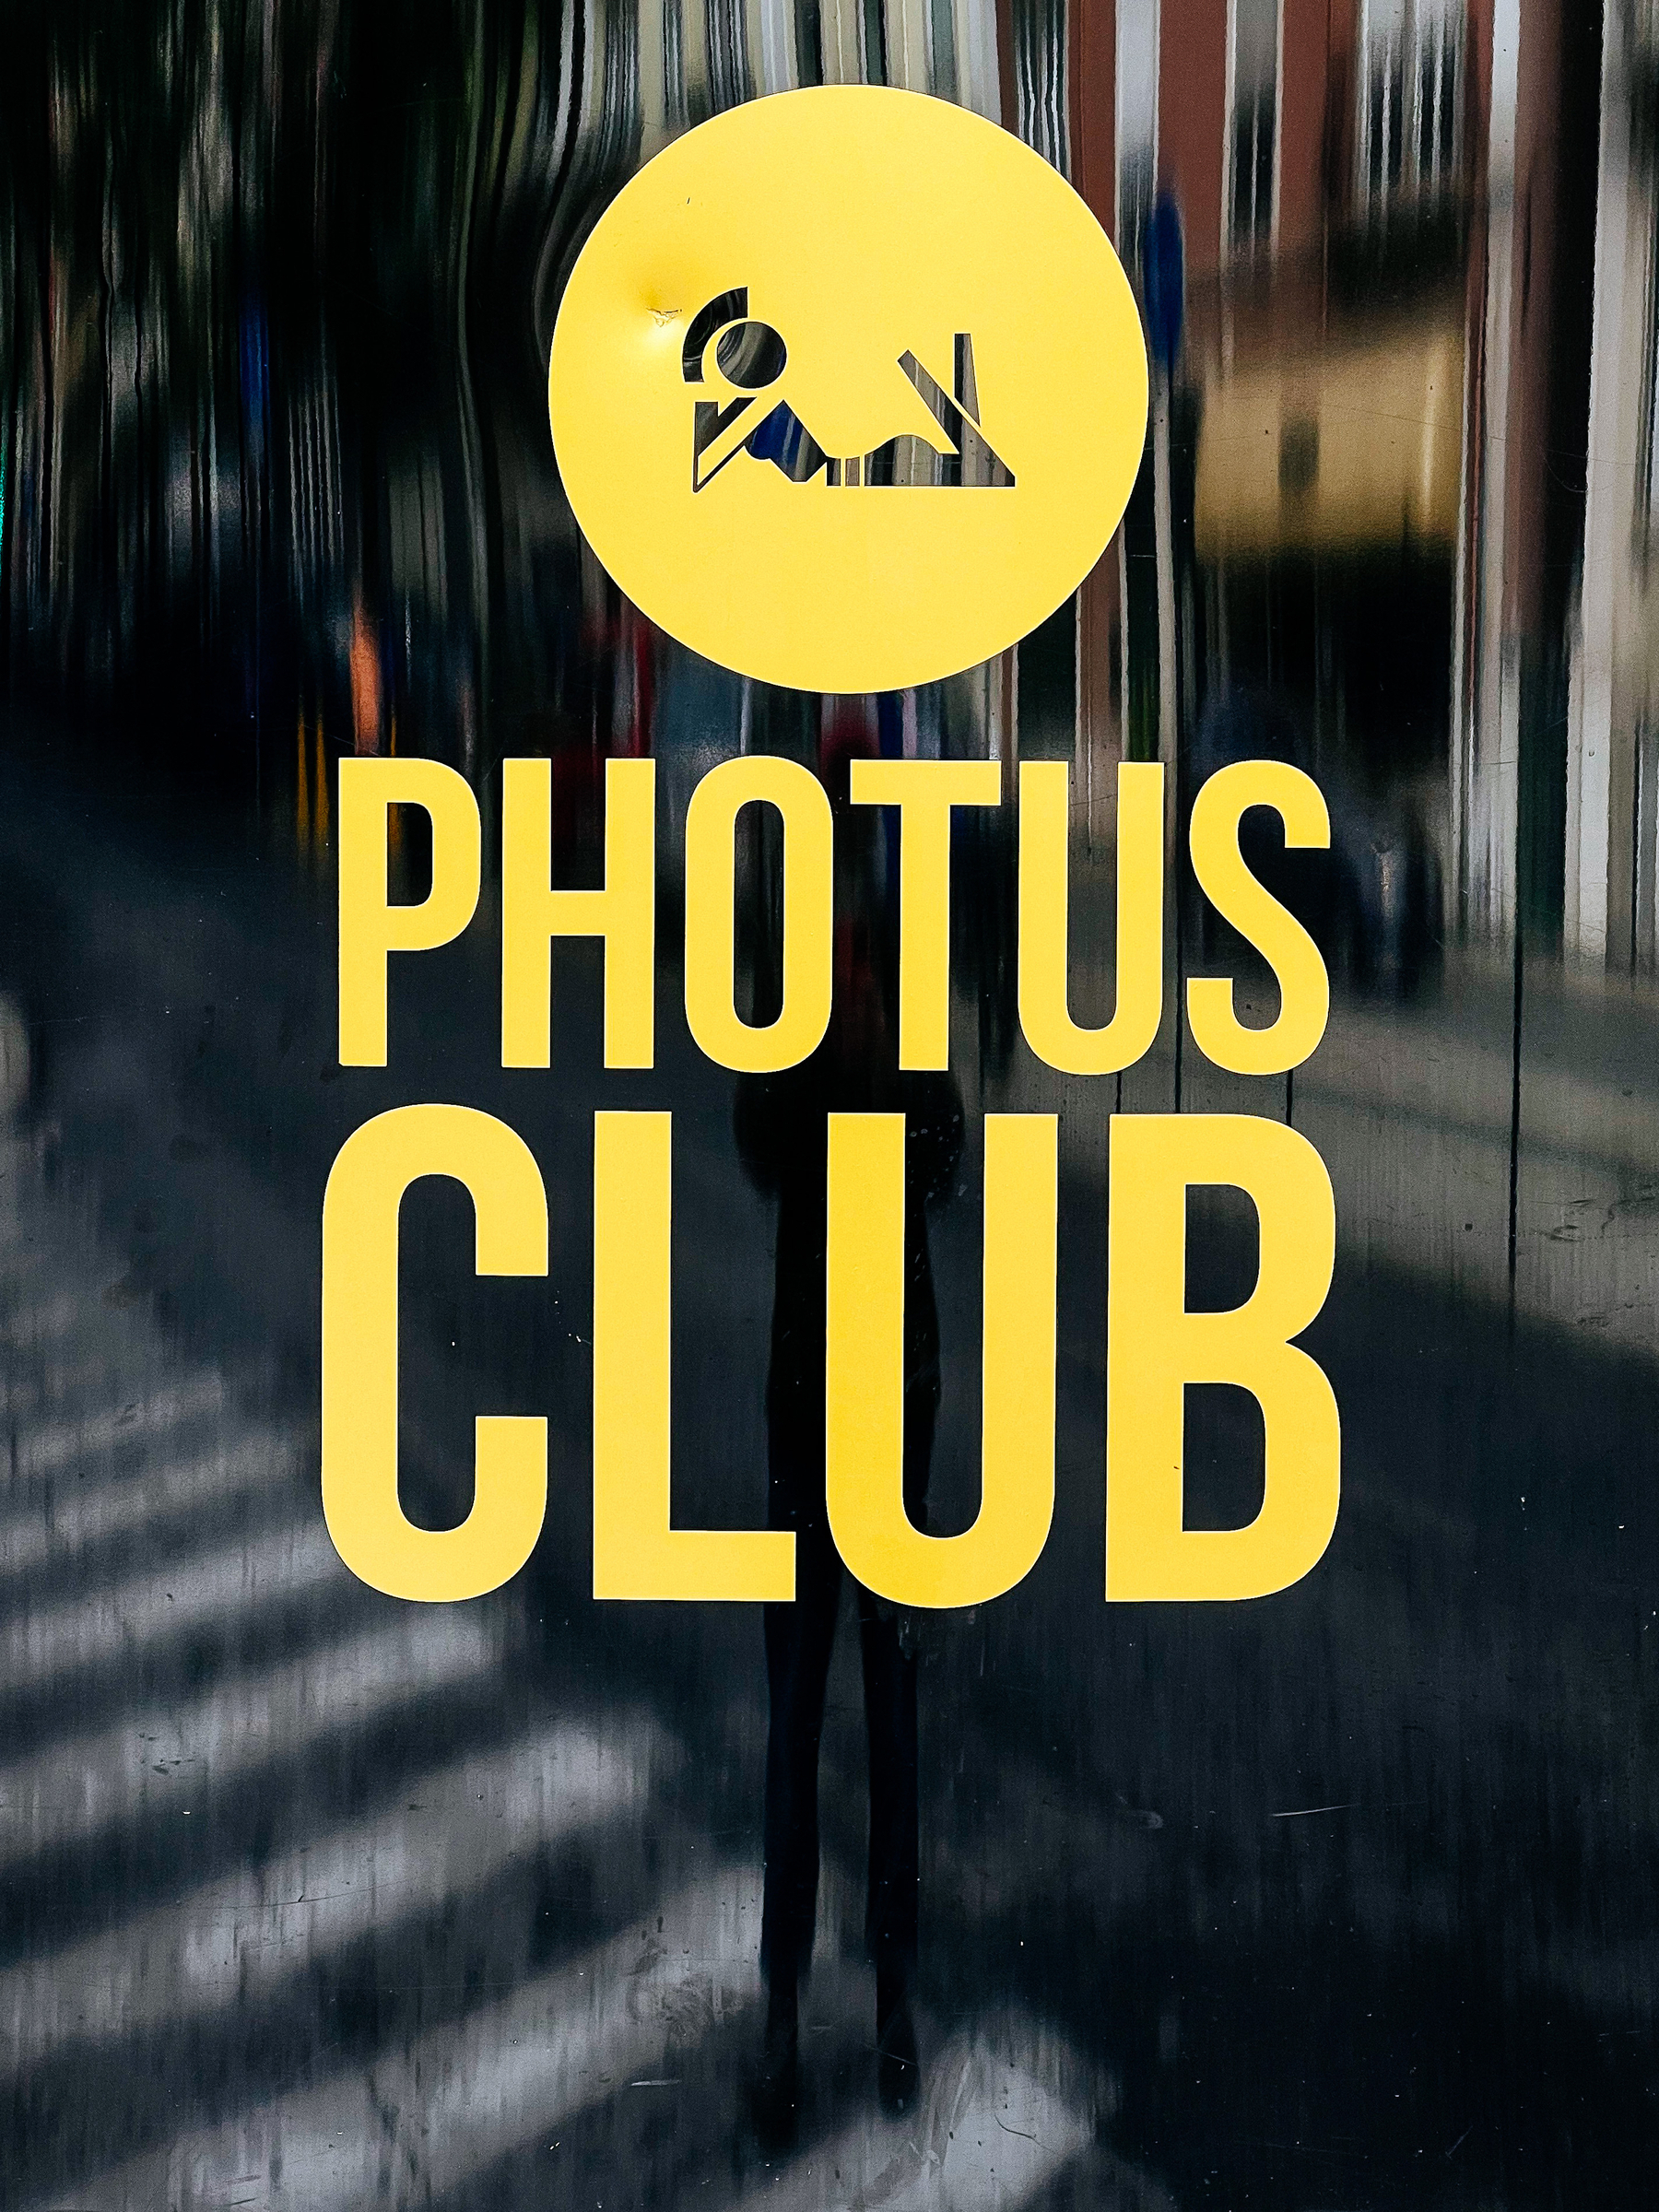 A business sign, “photus club”